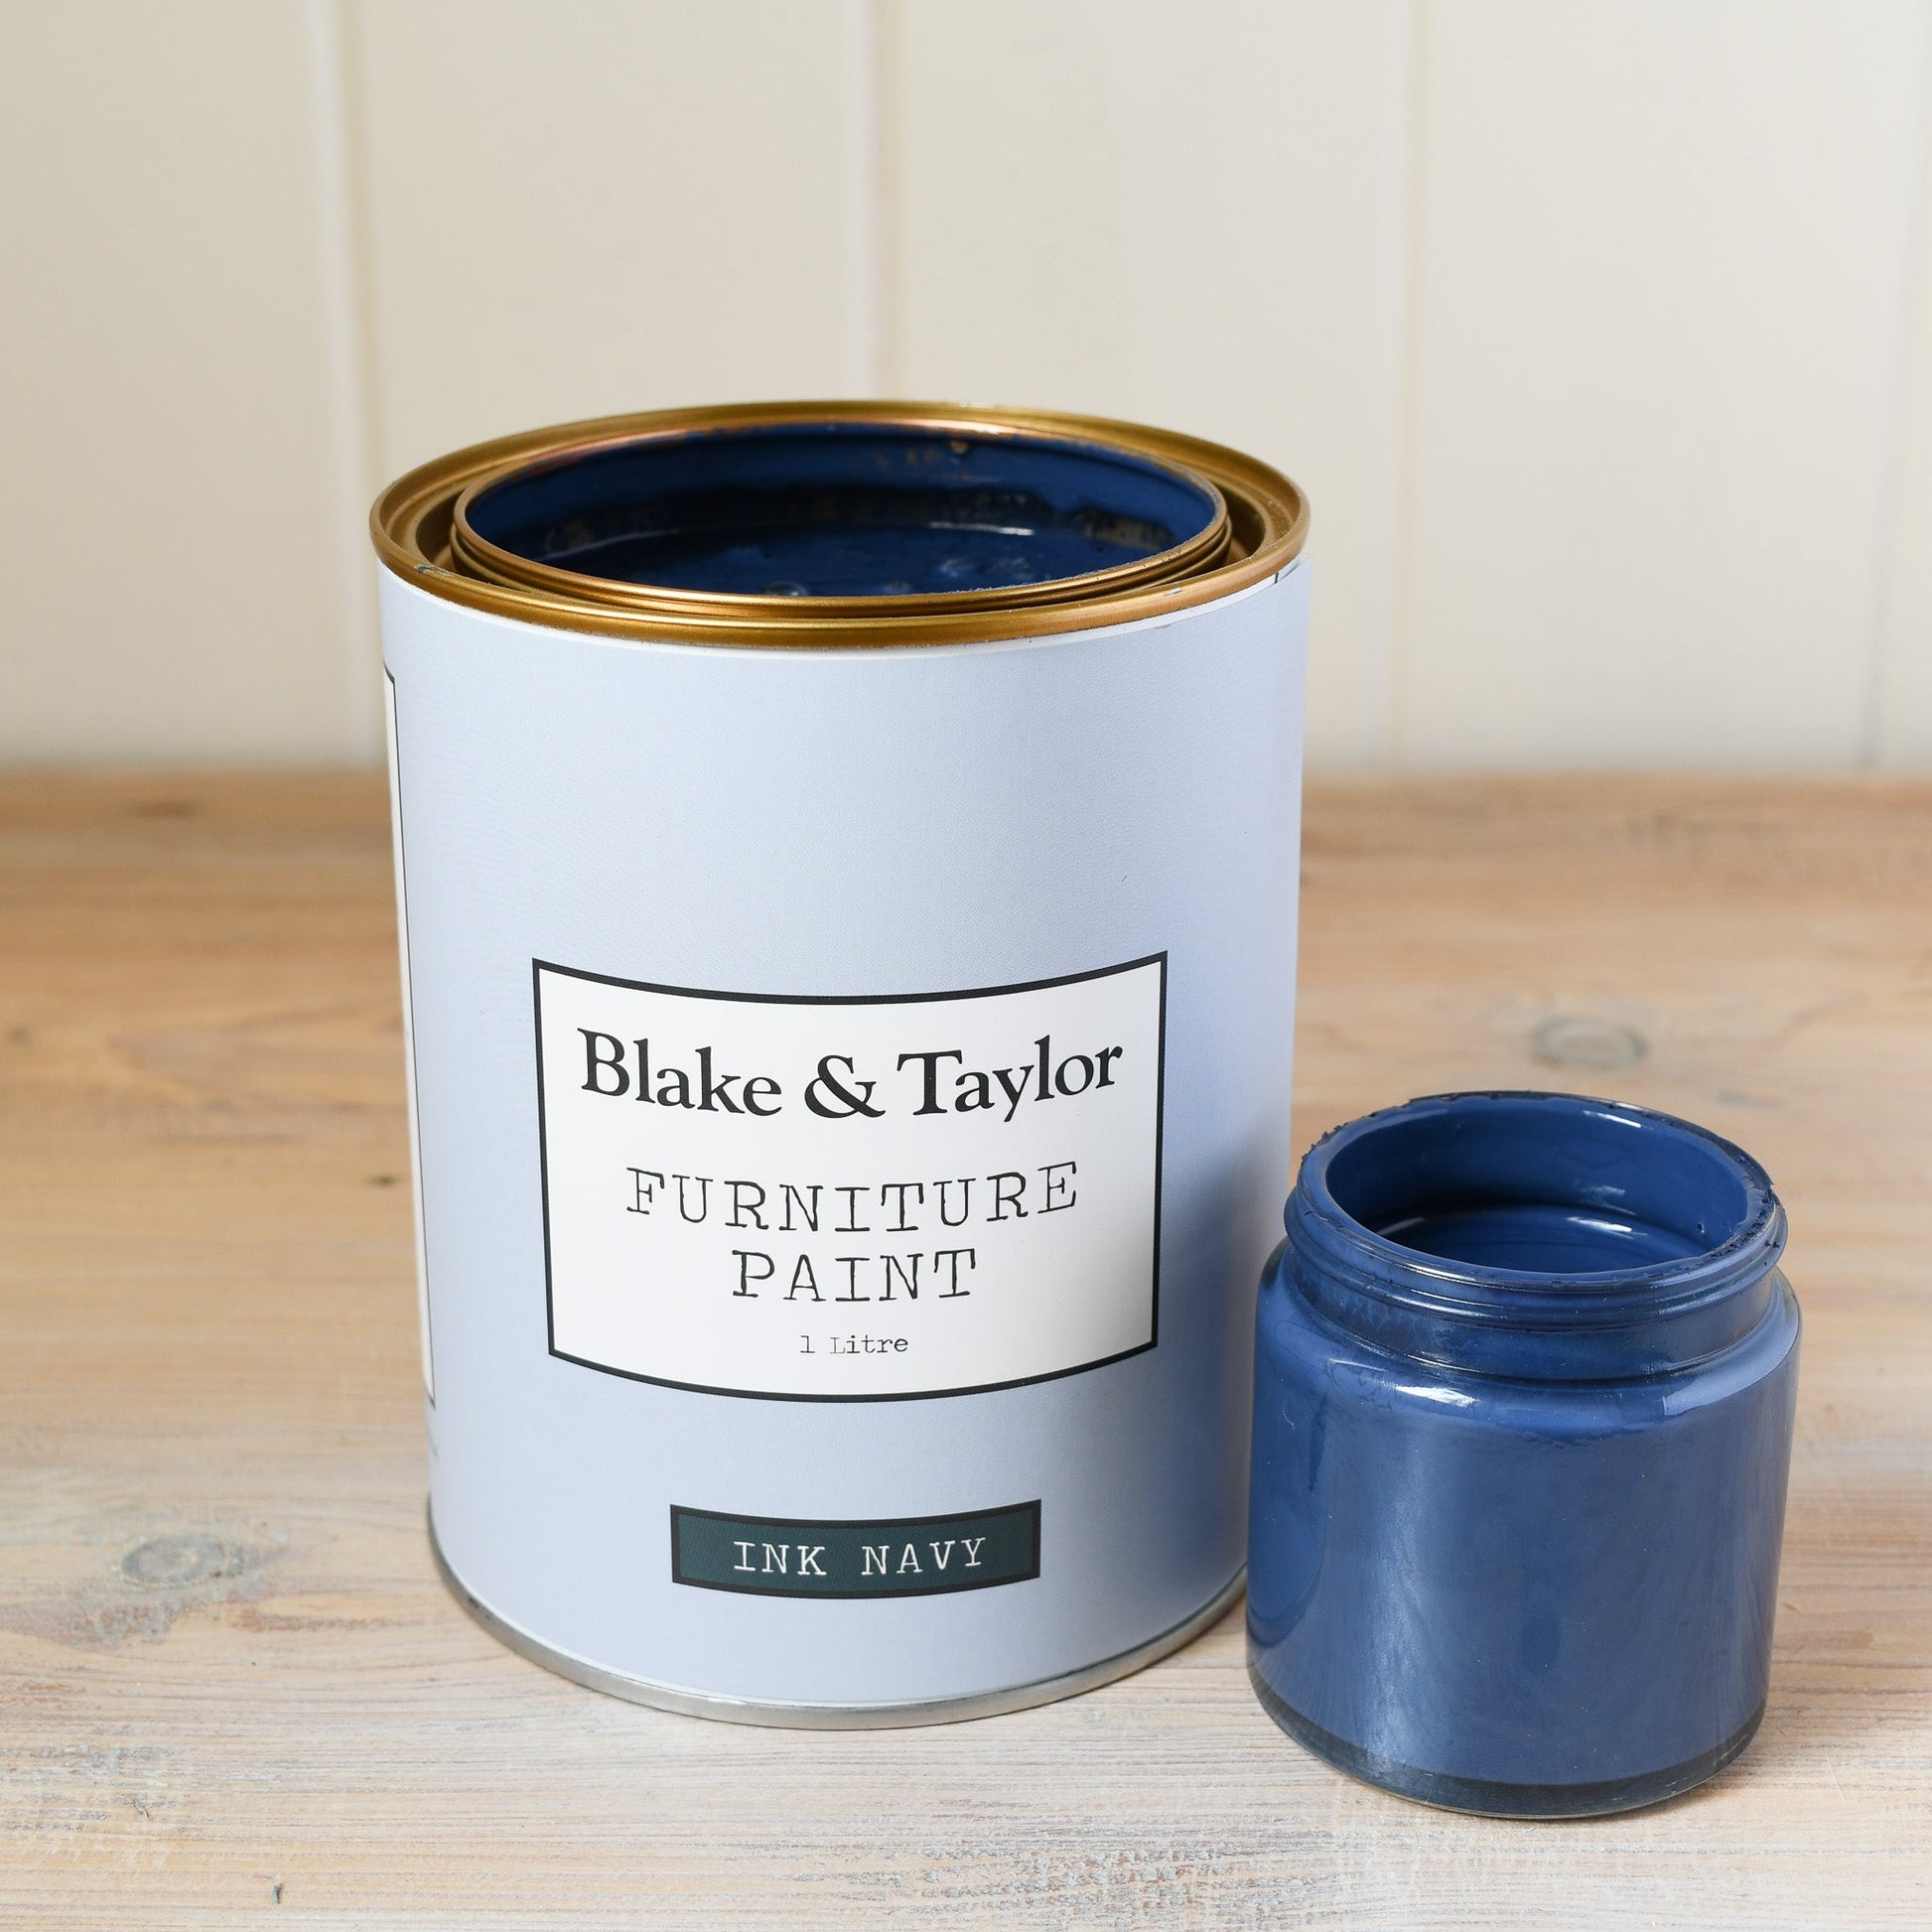 1 litre tin and 120ml pot of Inky Navy Blake & Taylor Chalk Furniture Paint